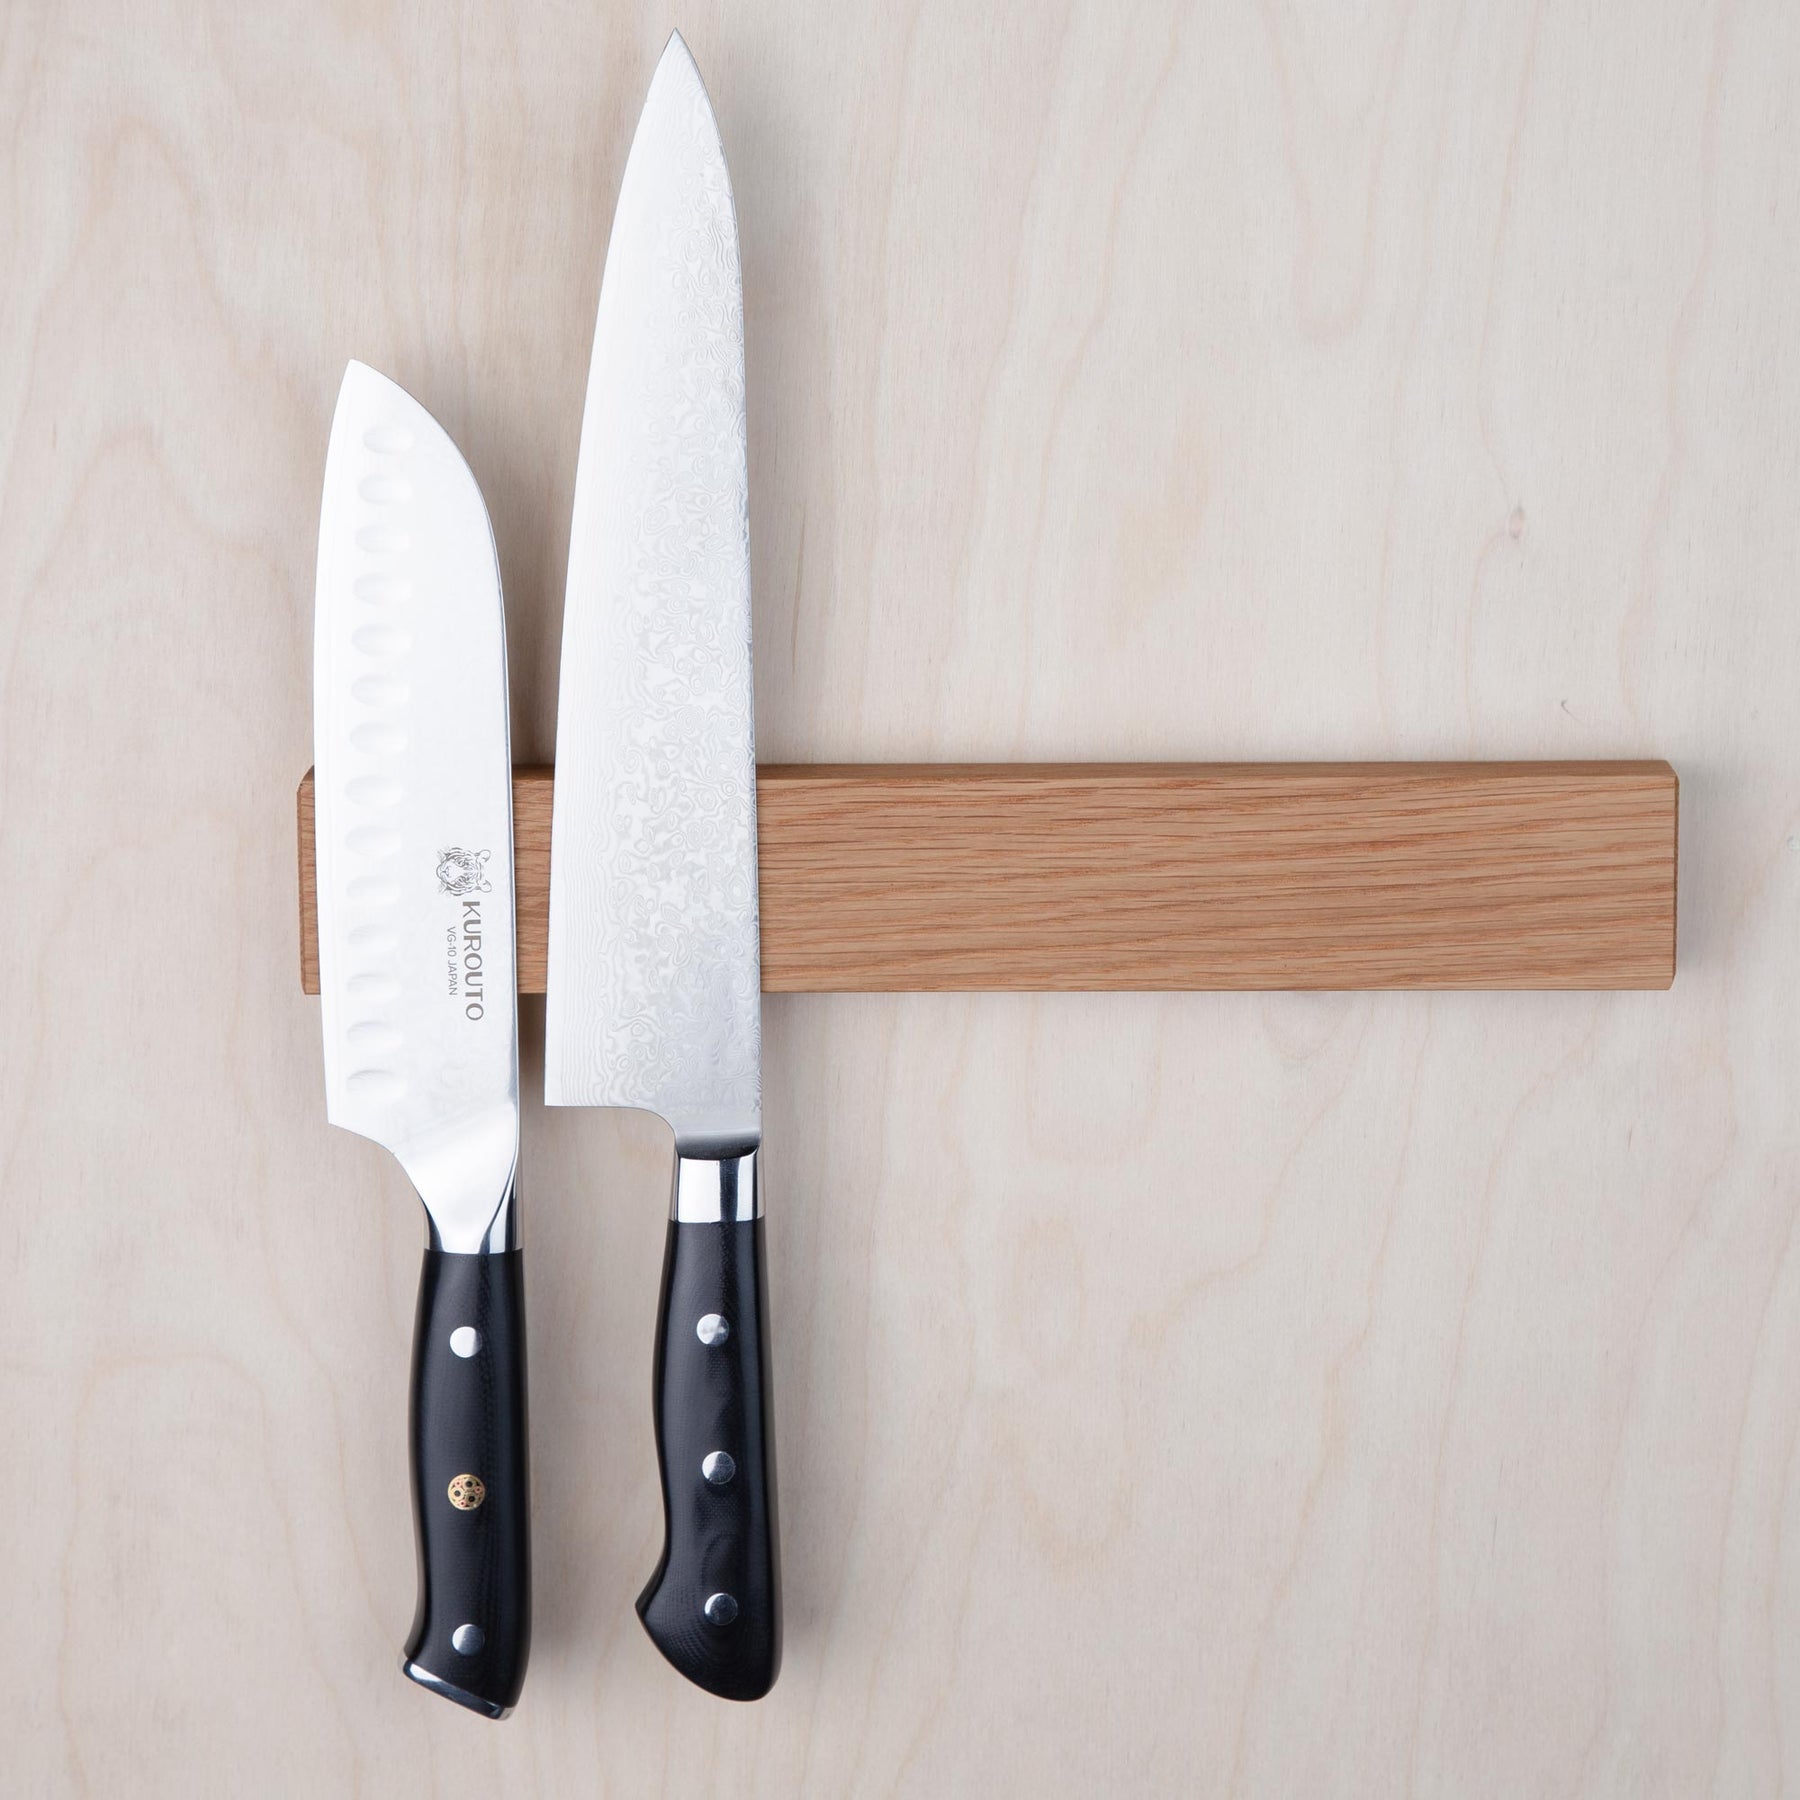 Kurouto Kitchenware White Oak Magnetic Knife Block -12 Inch -Made in t